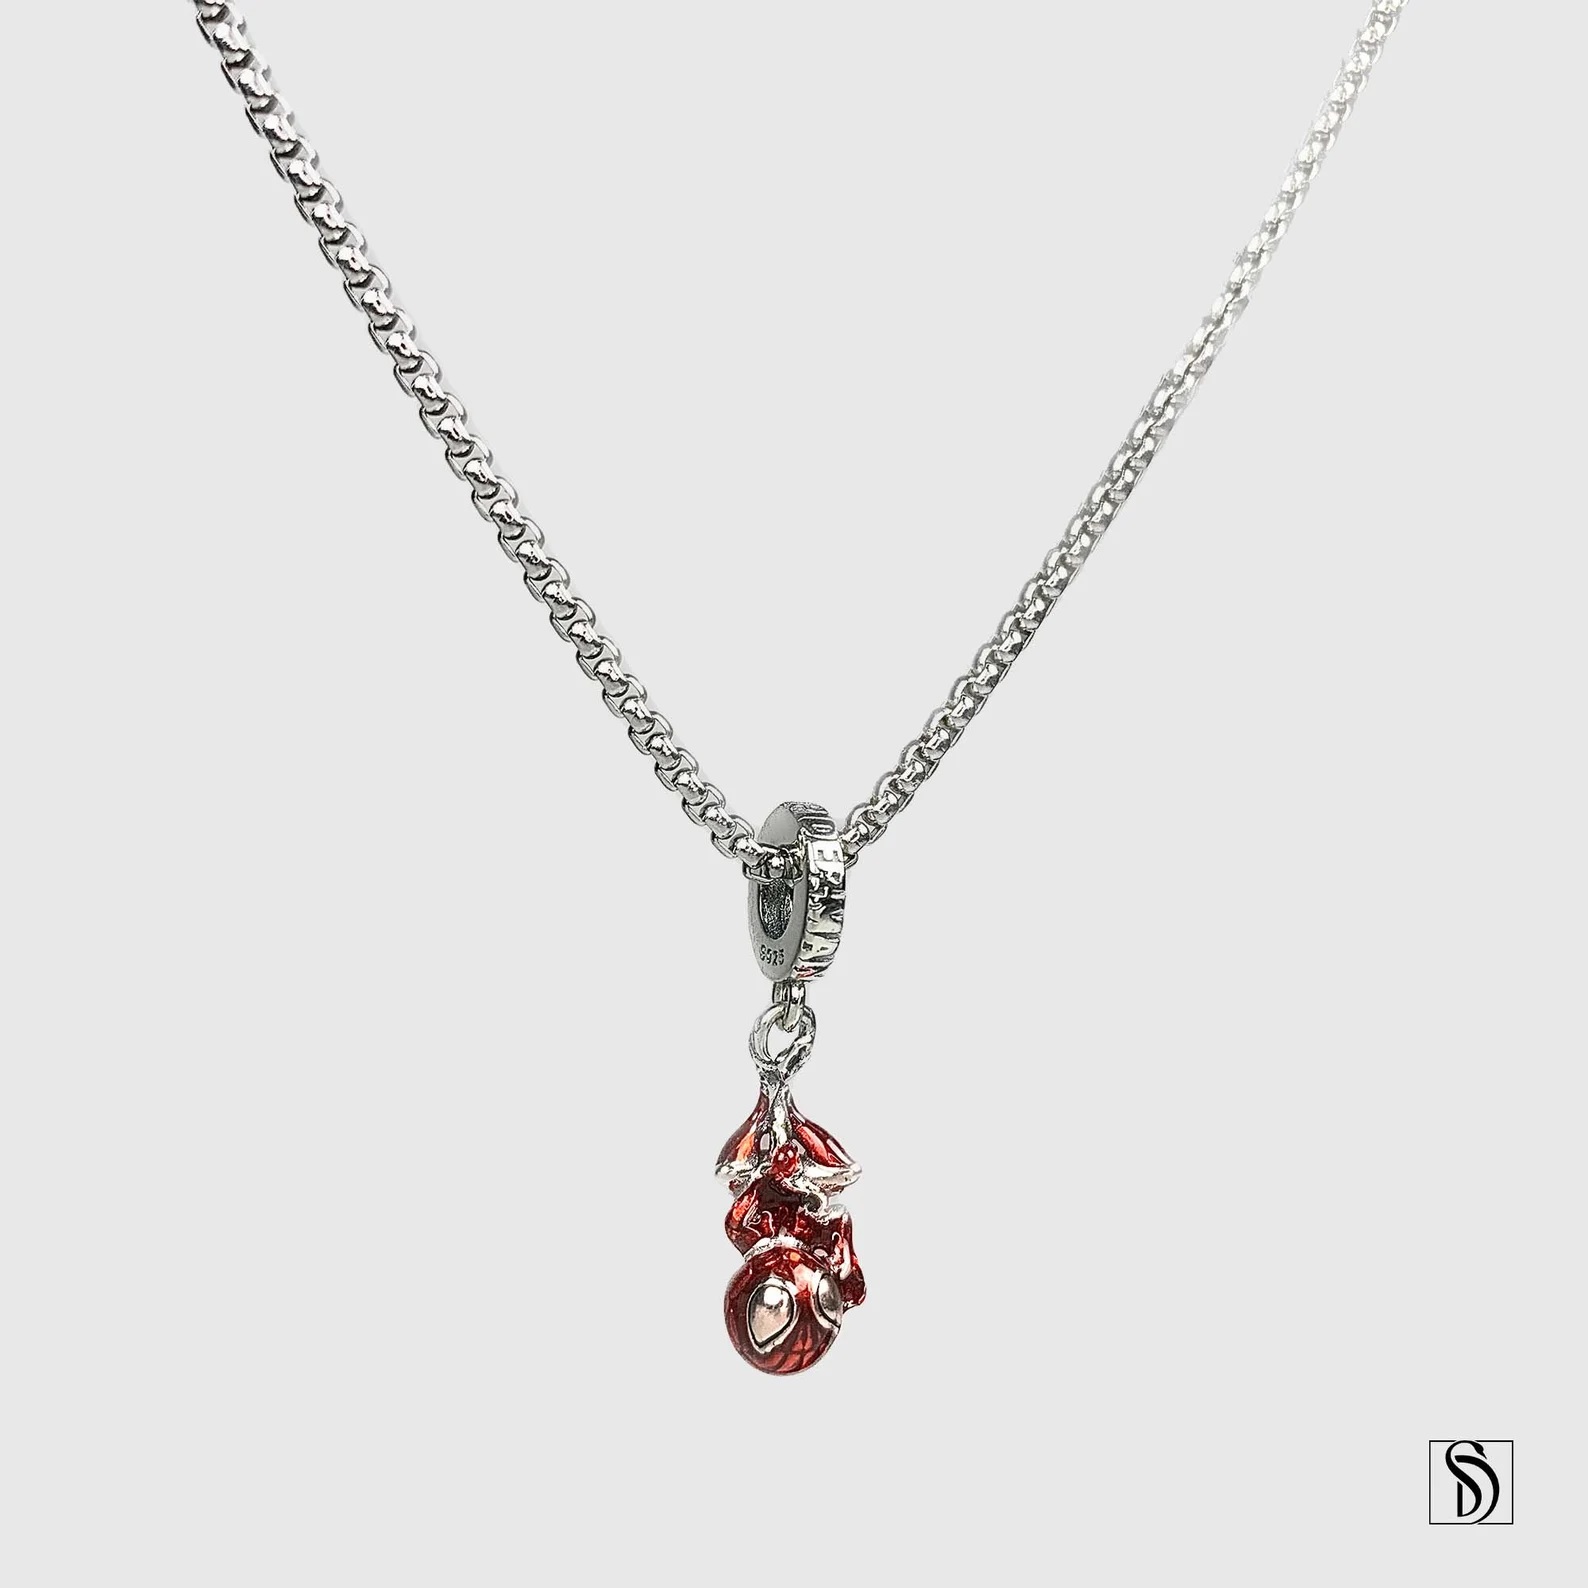 A silver chain necklace with a pendant of Spider-Man hanging upside-down